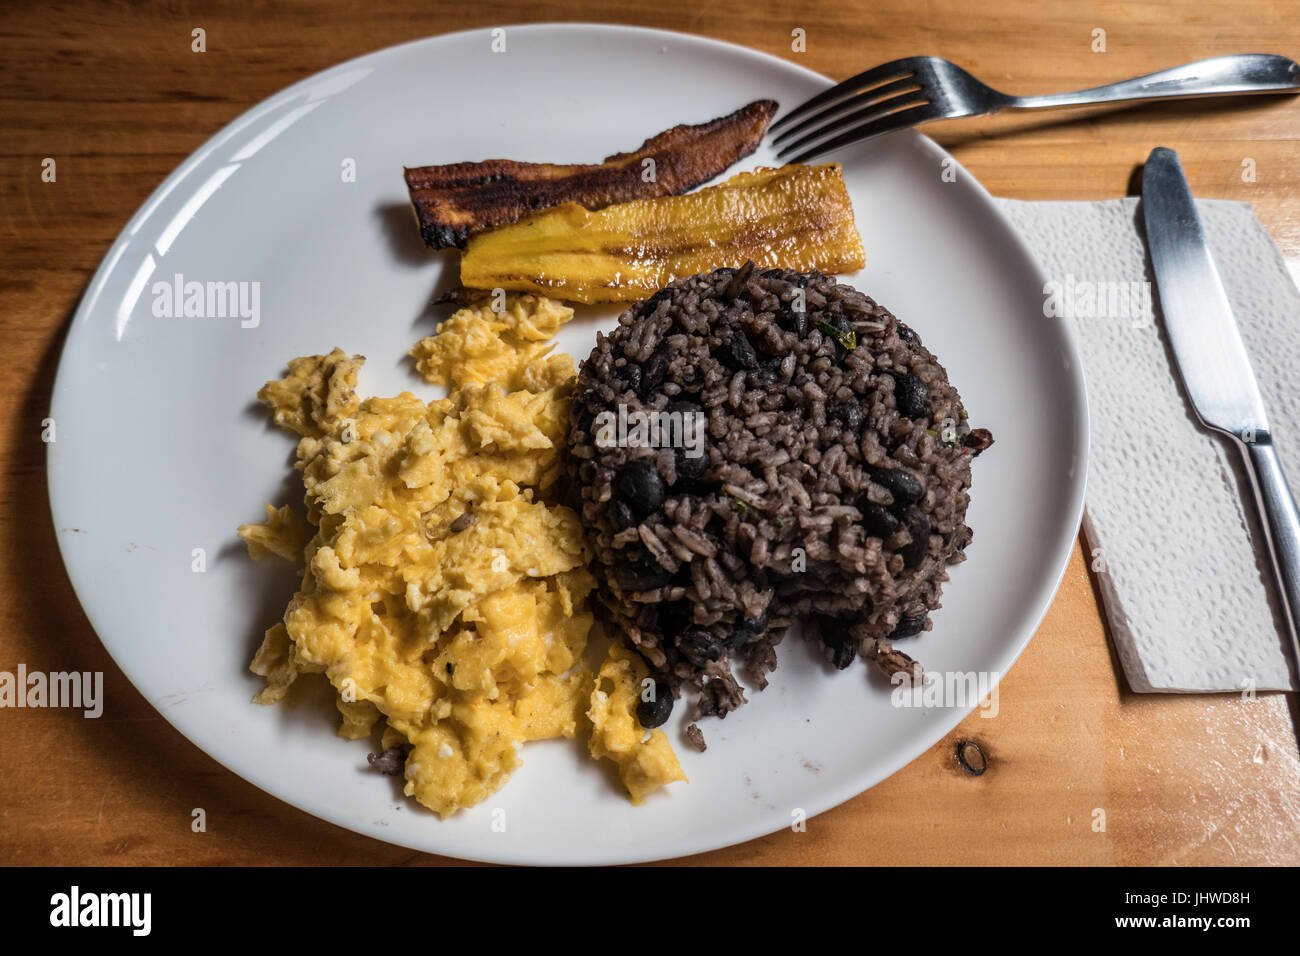 Typical casado food for breakfast, Costa Rica Stock Photo